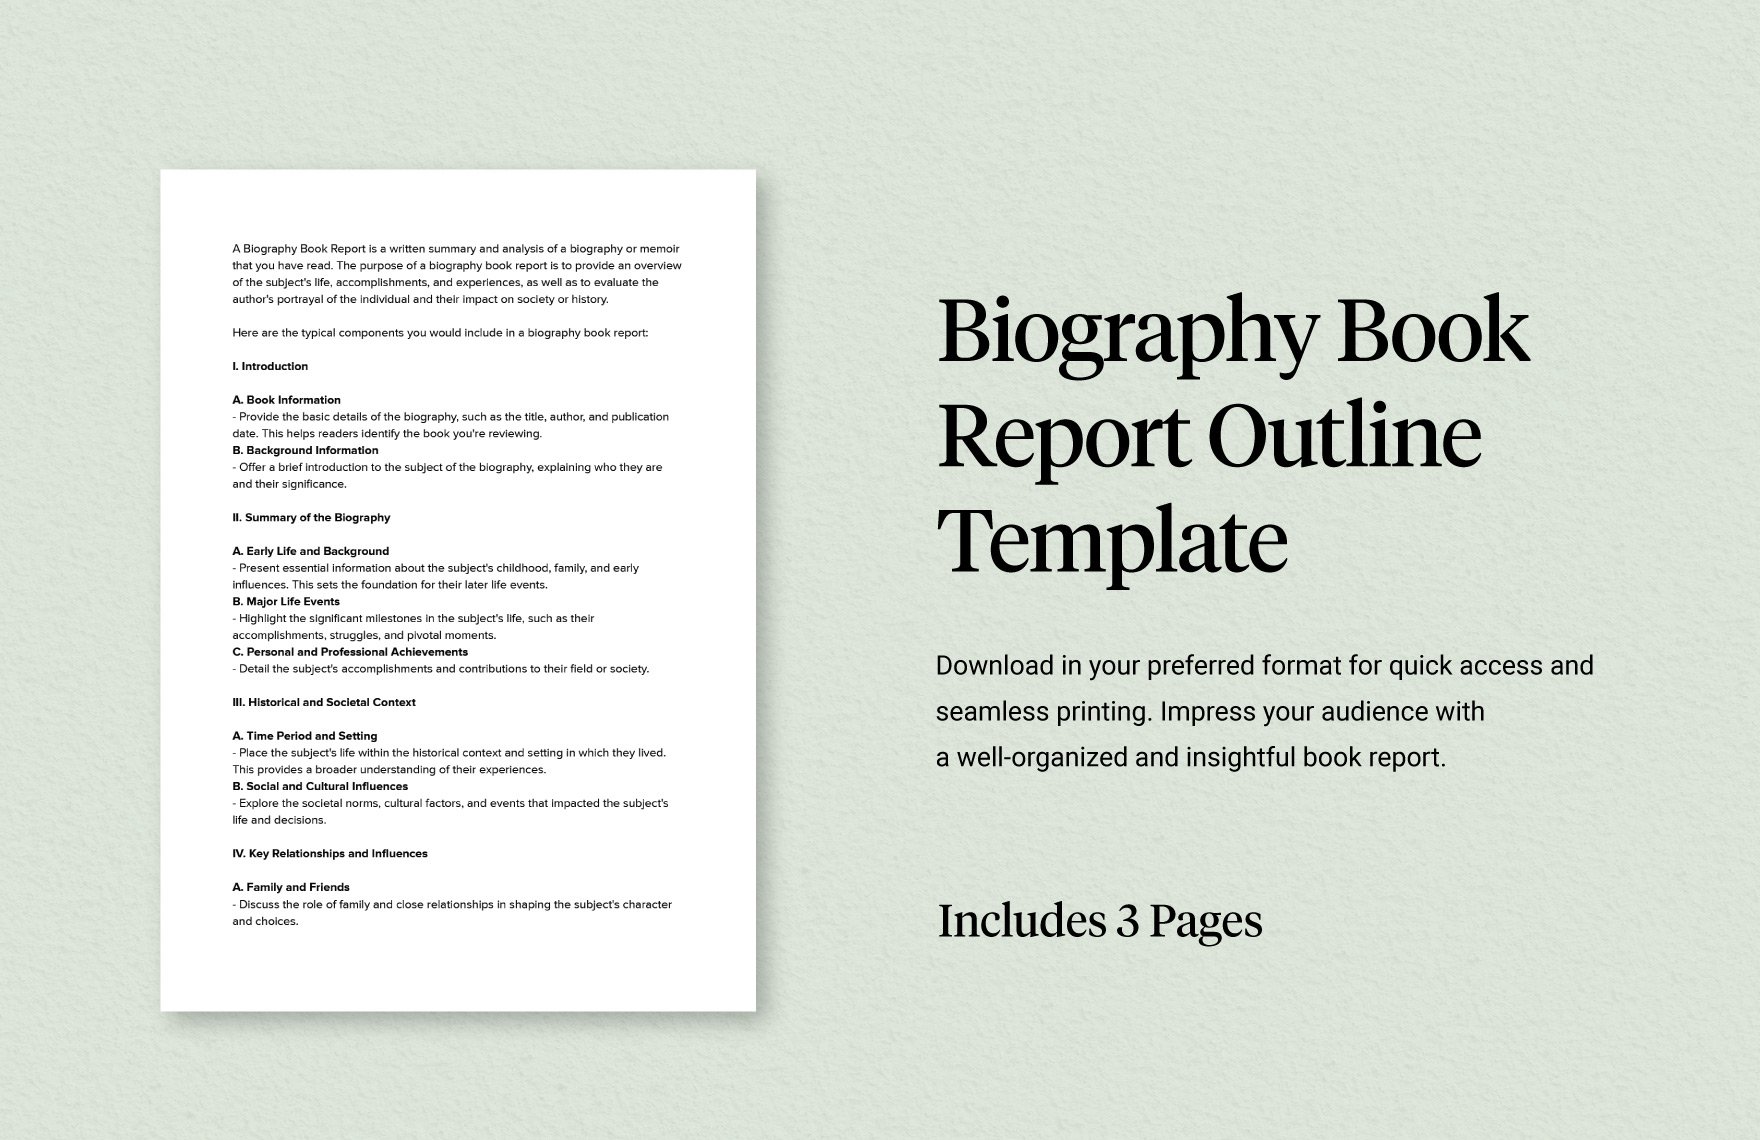 Biography Book Report Outline Template in Word, Google Docs, PDF